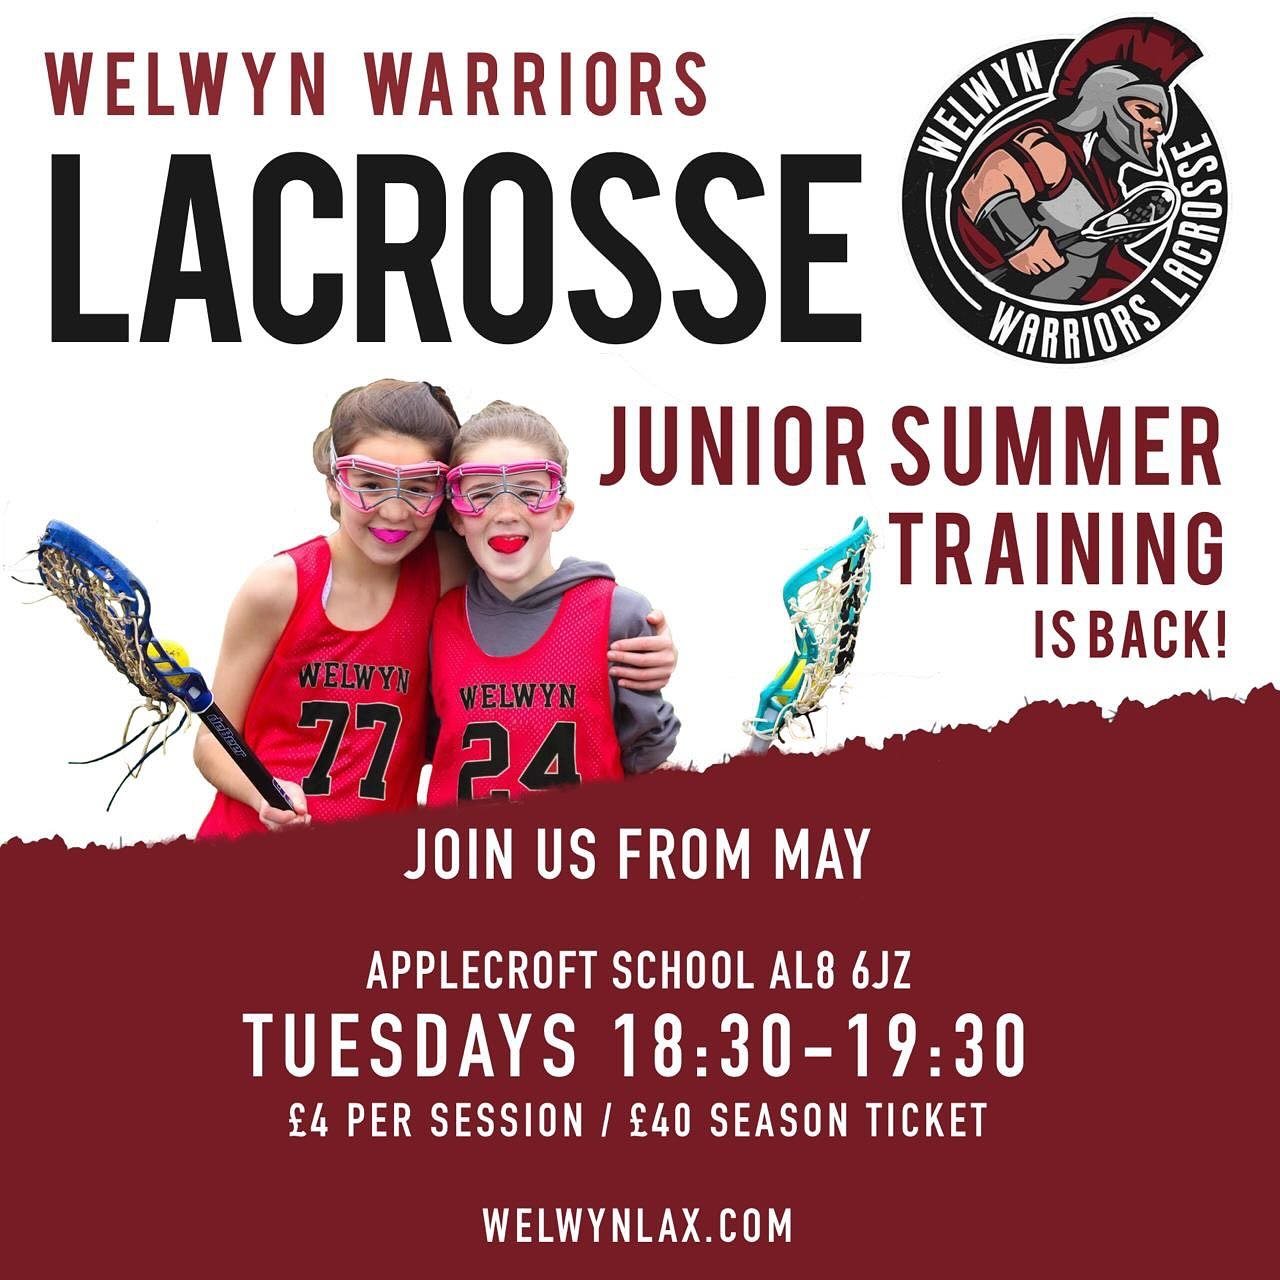 We get started on the 21st May for the start of our junior summer sessions! Give us a message if you&rsquo;re interested and like to know more!

#WelwynWarriors #Lacrosse #Hertfordshire #Welwyn #Hatfield #GrowTheGame